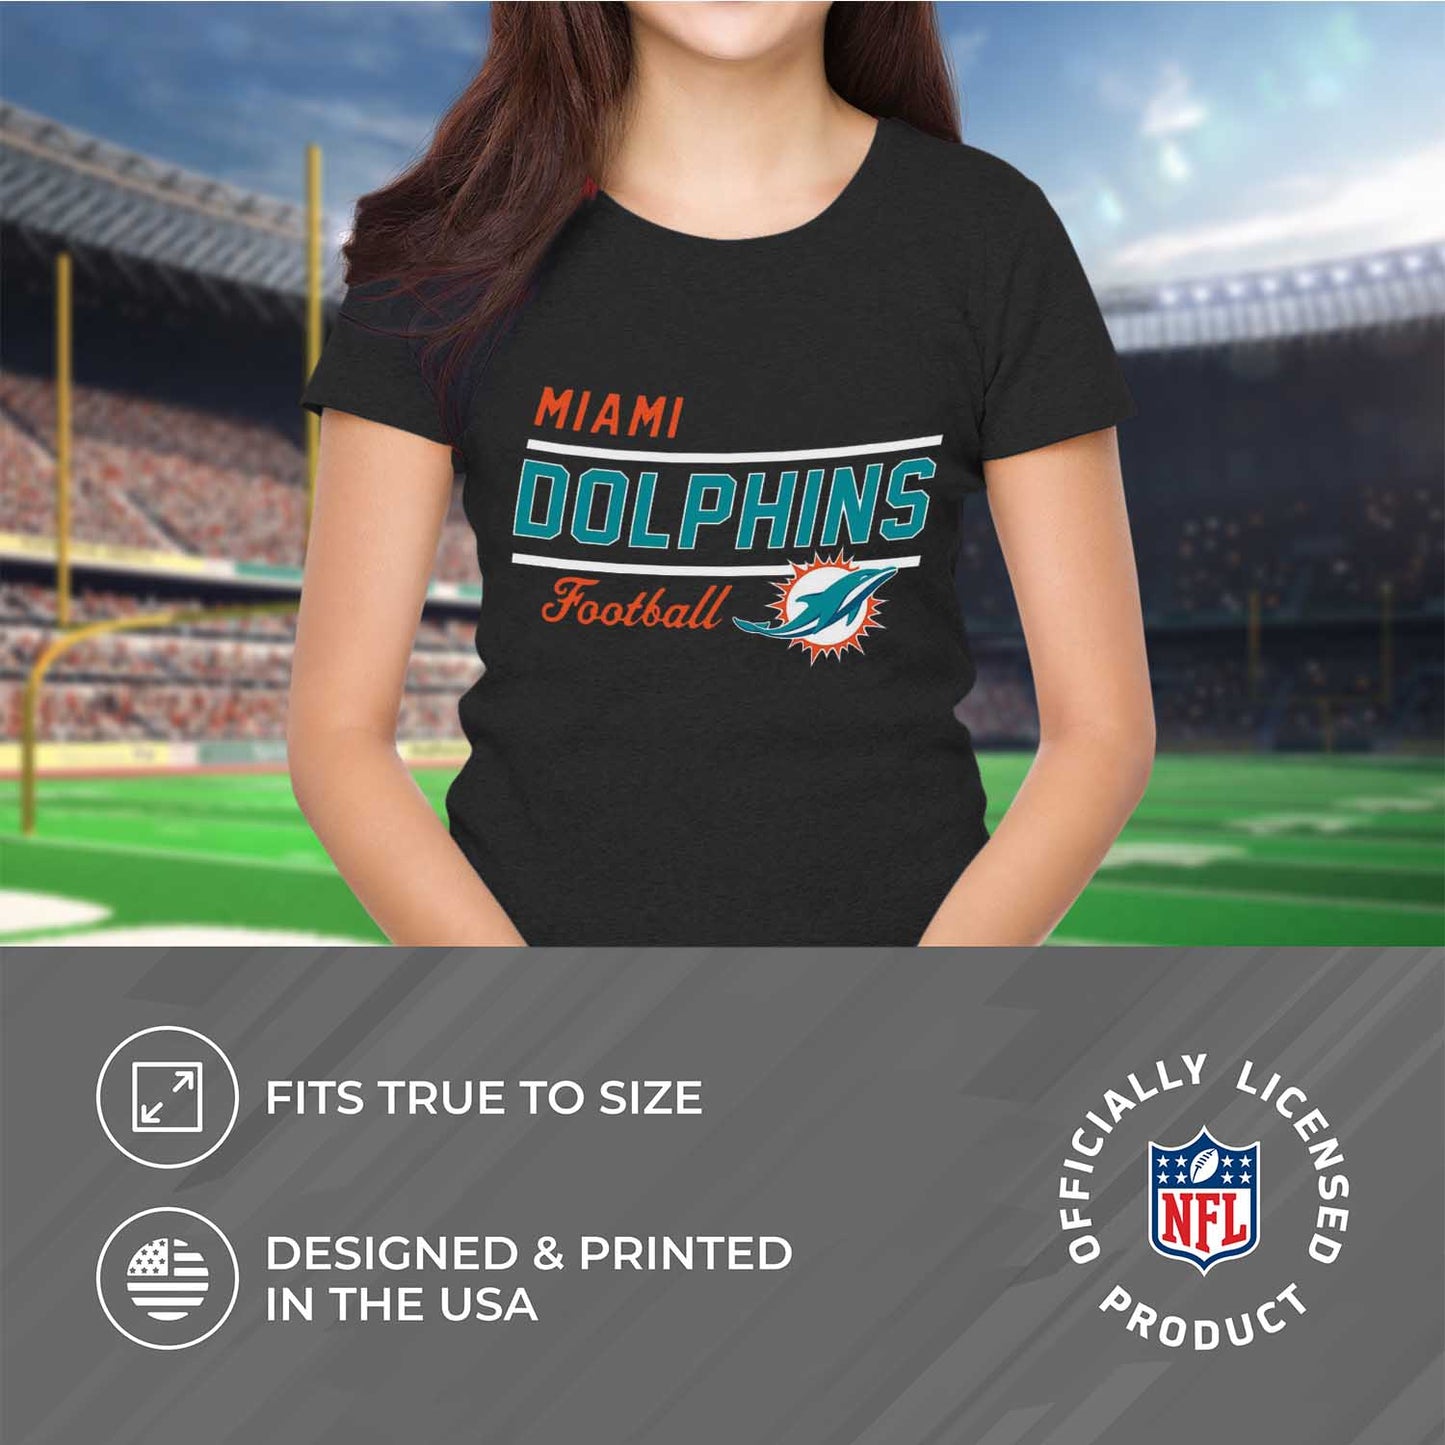 Miami Dolphins NFL Gameday Women's Relaxed Fit T-shirt - Black